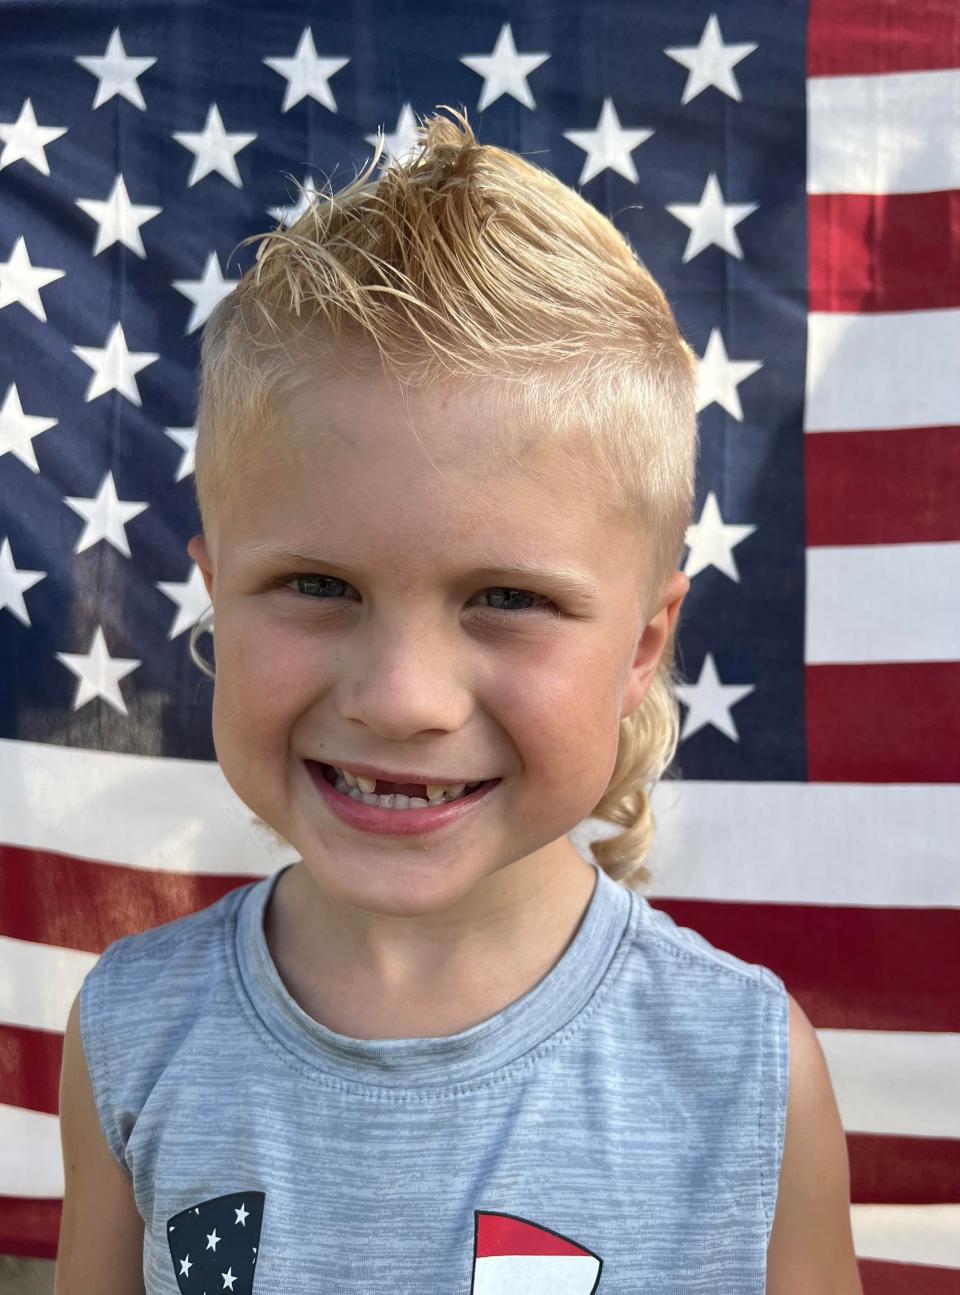 Axel Wenzel, 5, of Brillion, Wisconsin, poses for his submission photo for the USA Mullet Championships.